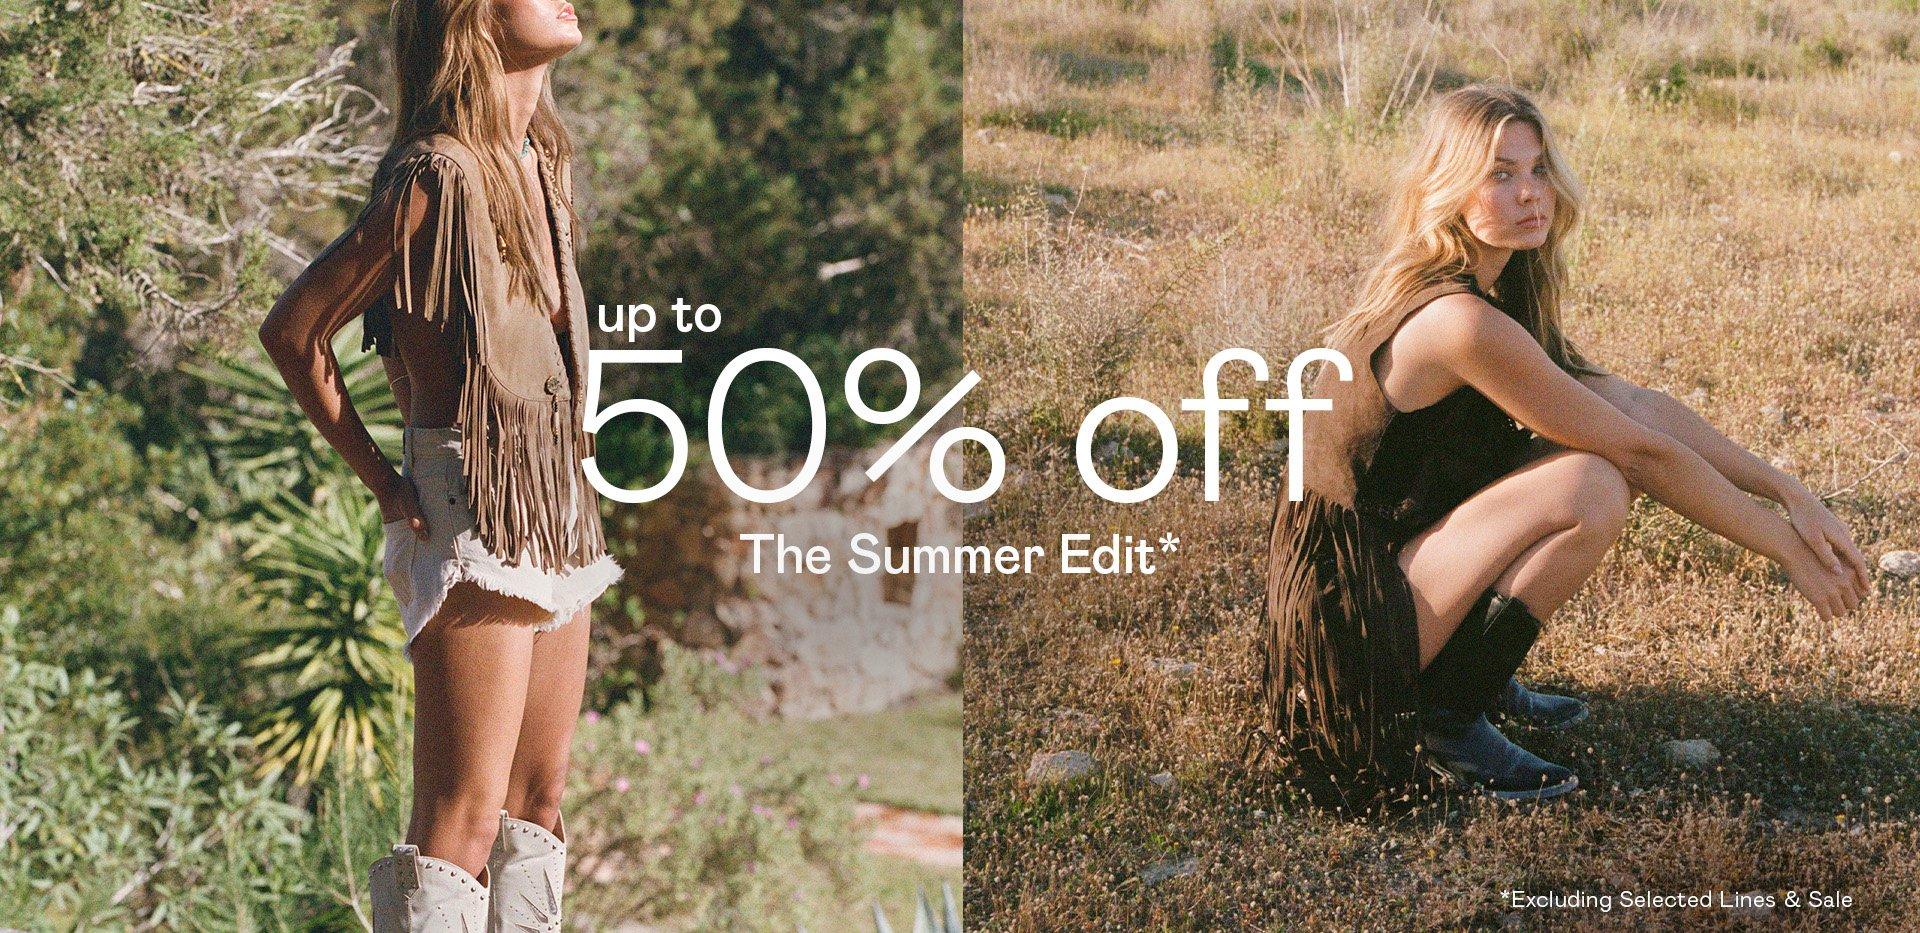 Up to 50% Off Seasonal Styles*